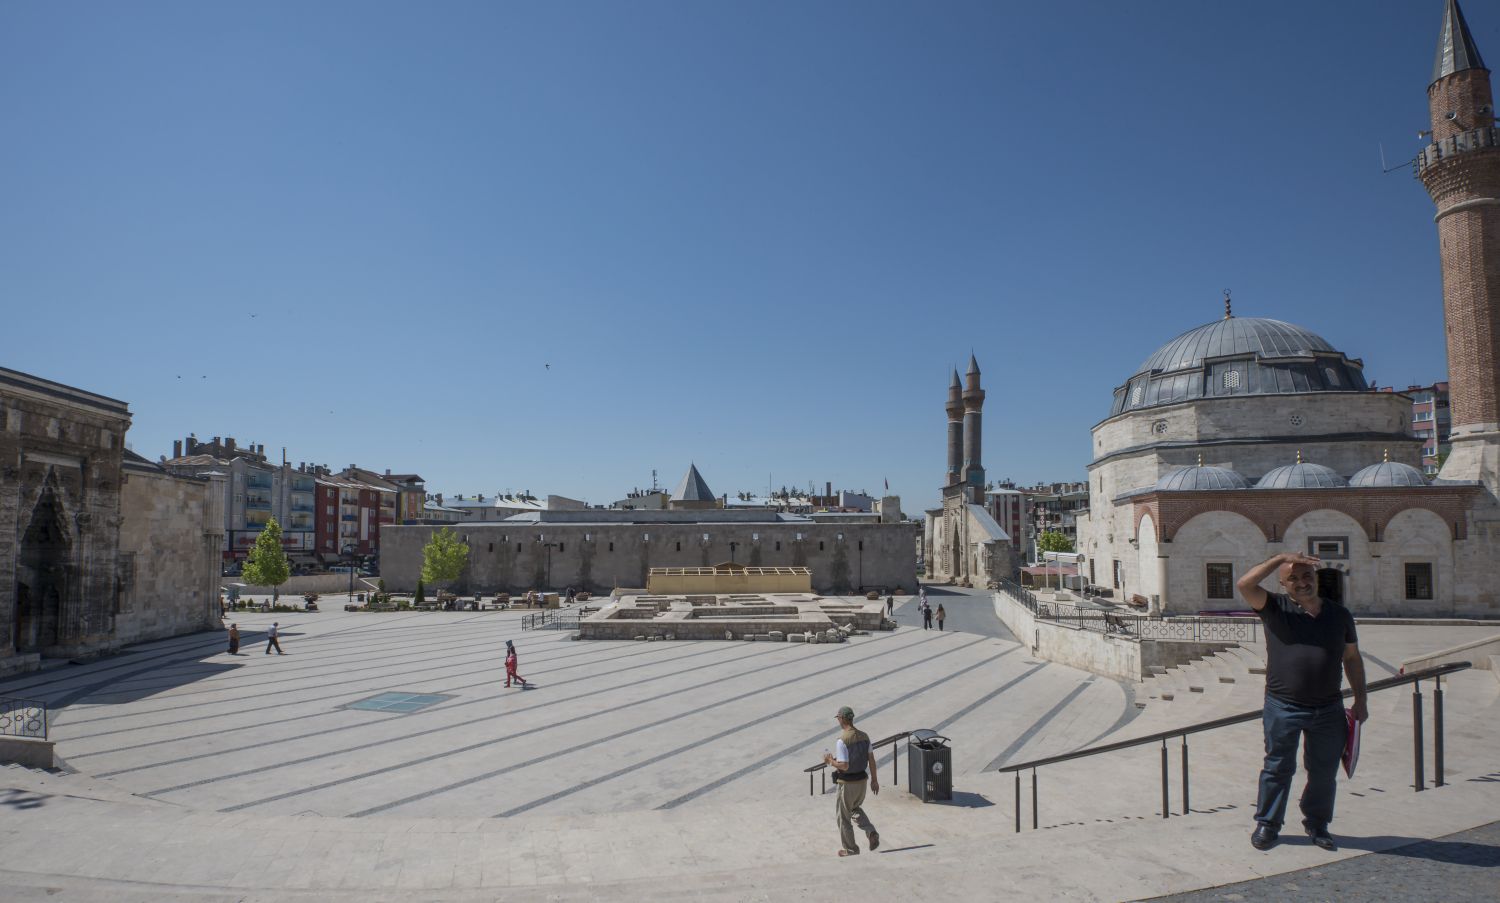 View of town square from northeast. Kale Camii is visible on the right, with the twin minarets of Cifte Minareli Medrese rising in background. Toward the center is the north face of the Sifaiye Medresesi. In the foreground Buruciye Medresesi.